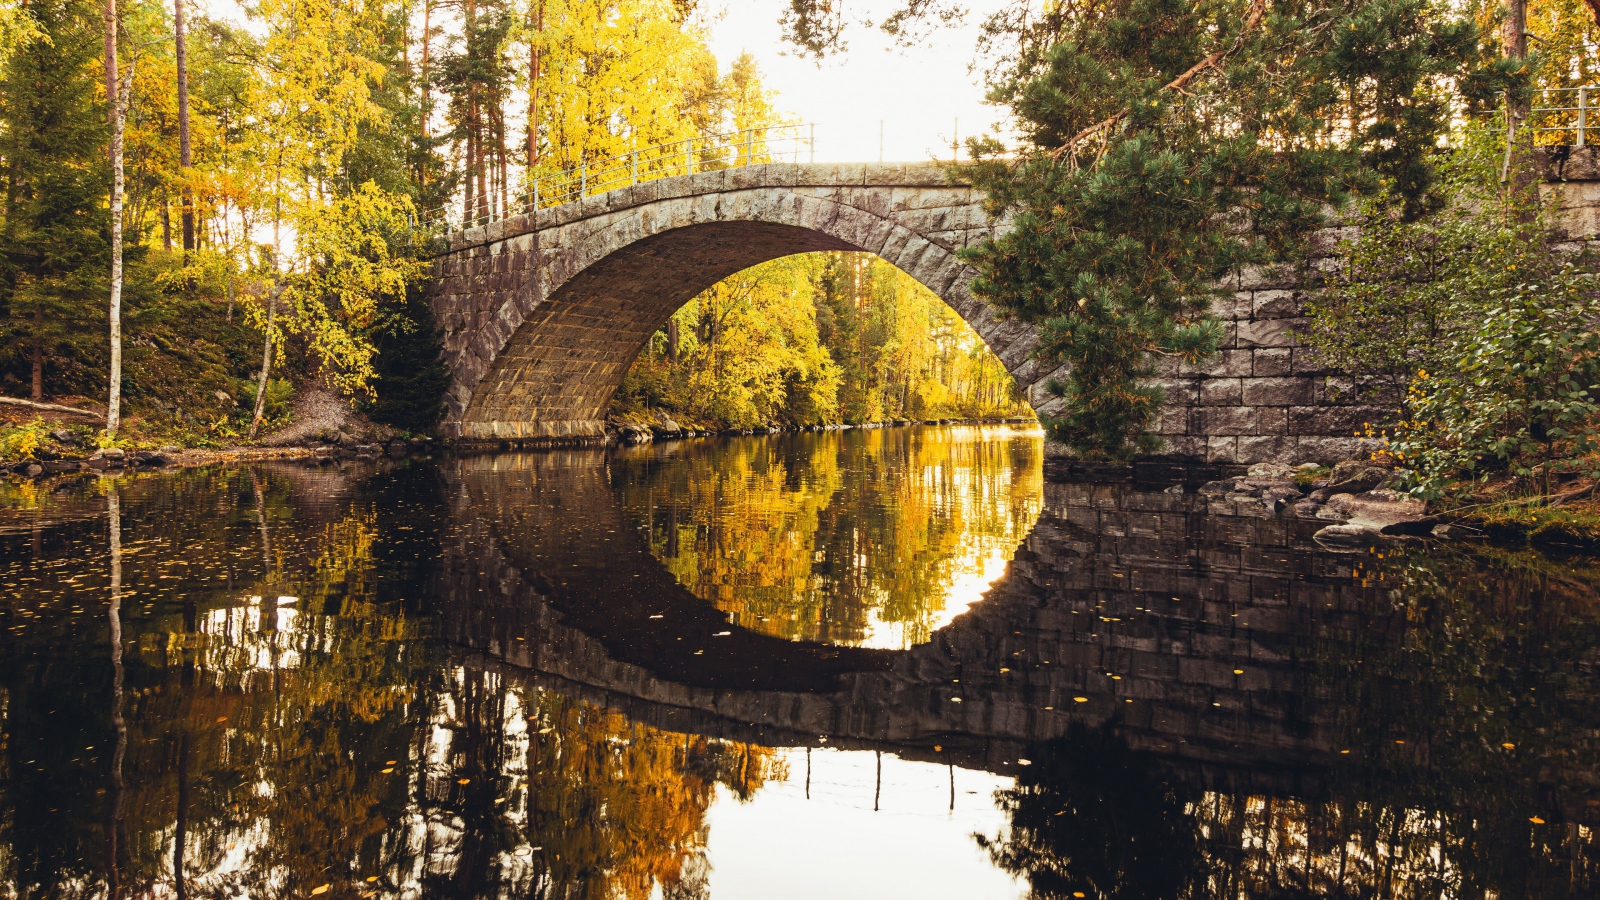 Old stone bridge over the river in the forest